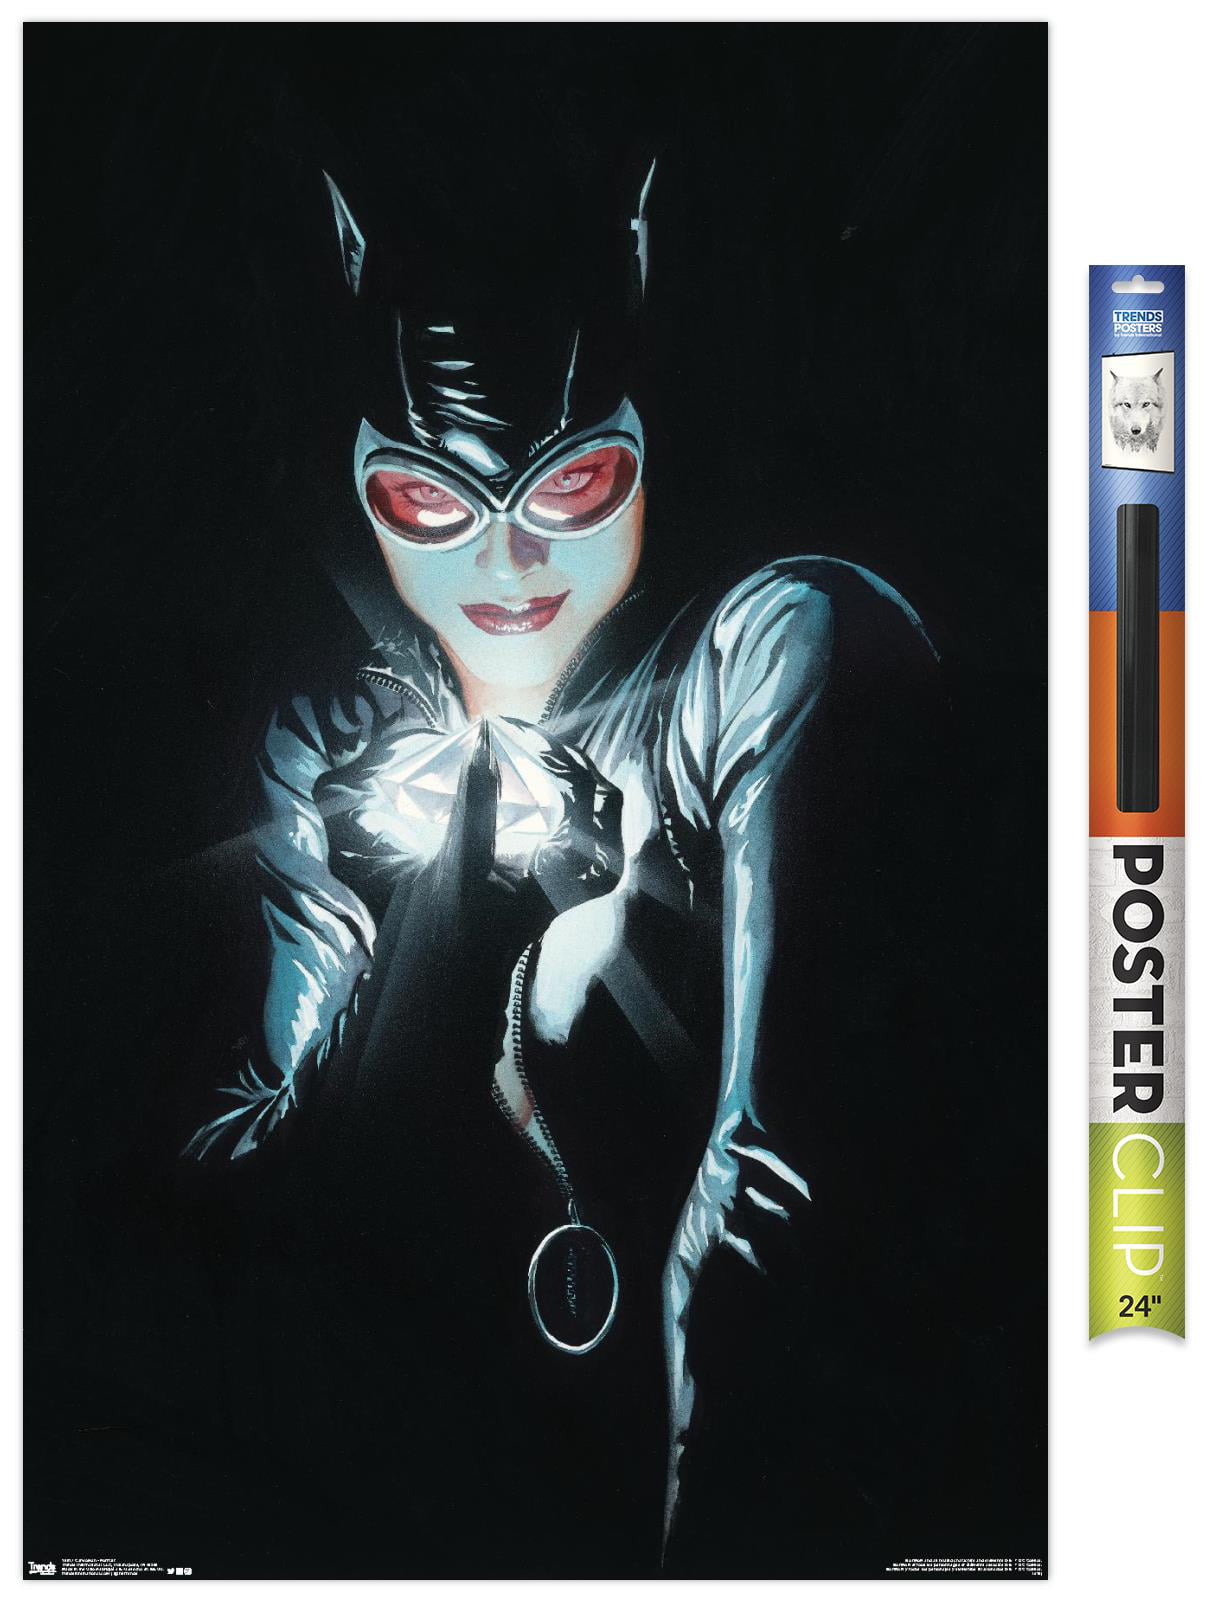 CATWOMEN PRIVATE PRINTING PICTURE 6 x 4.3 inches 